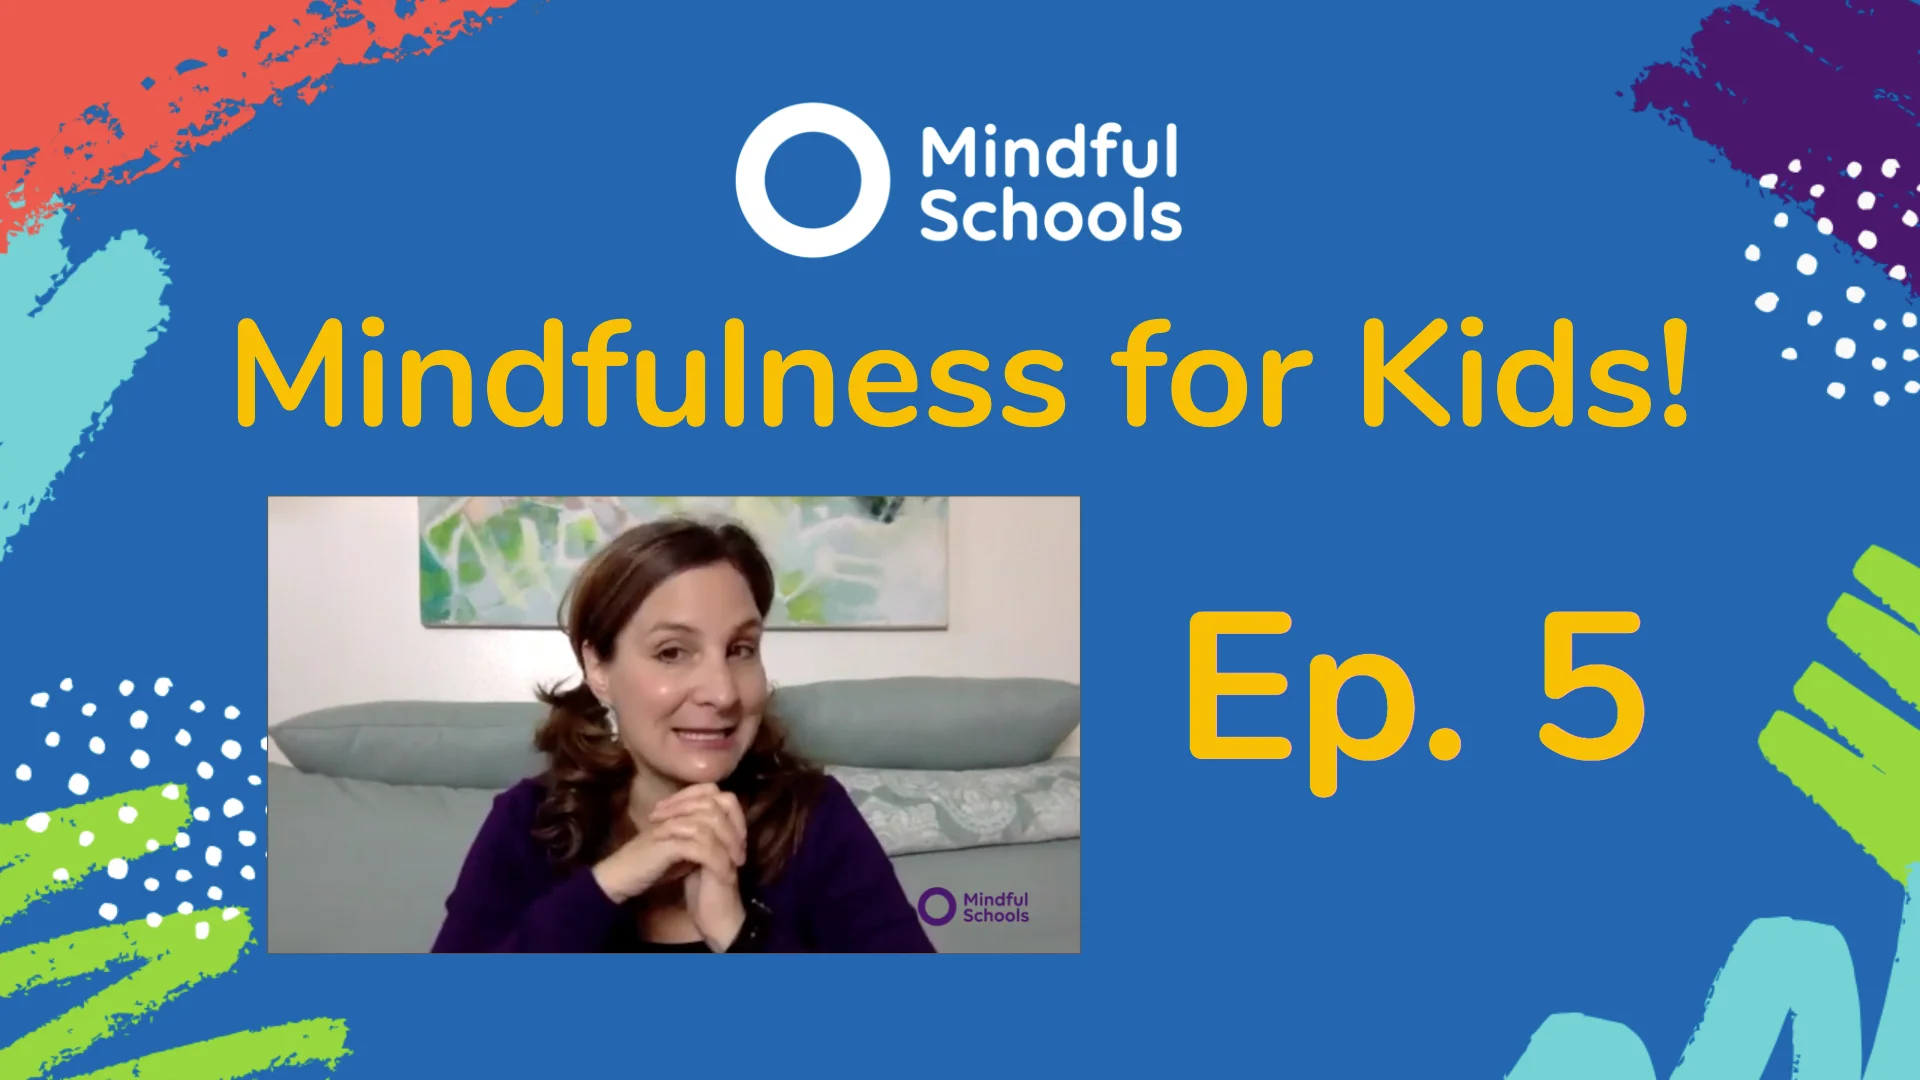 What is Mindfulness? - Mindful Schools